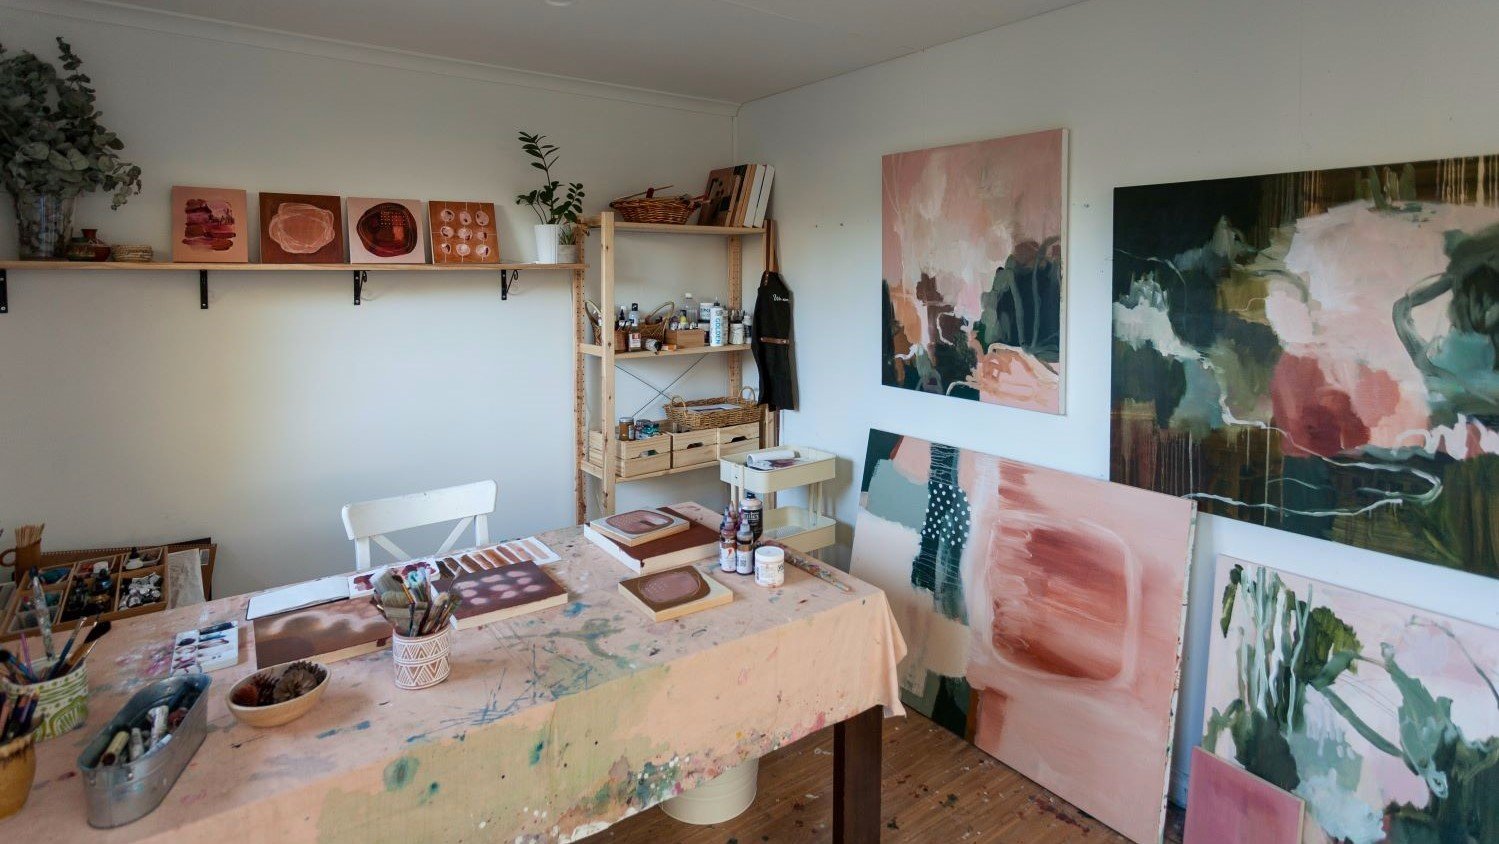 Art studio with green, pink, and beige abstract art on walls above a messy work desk.